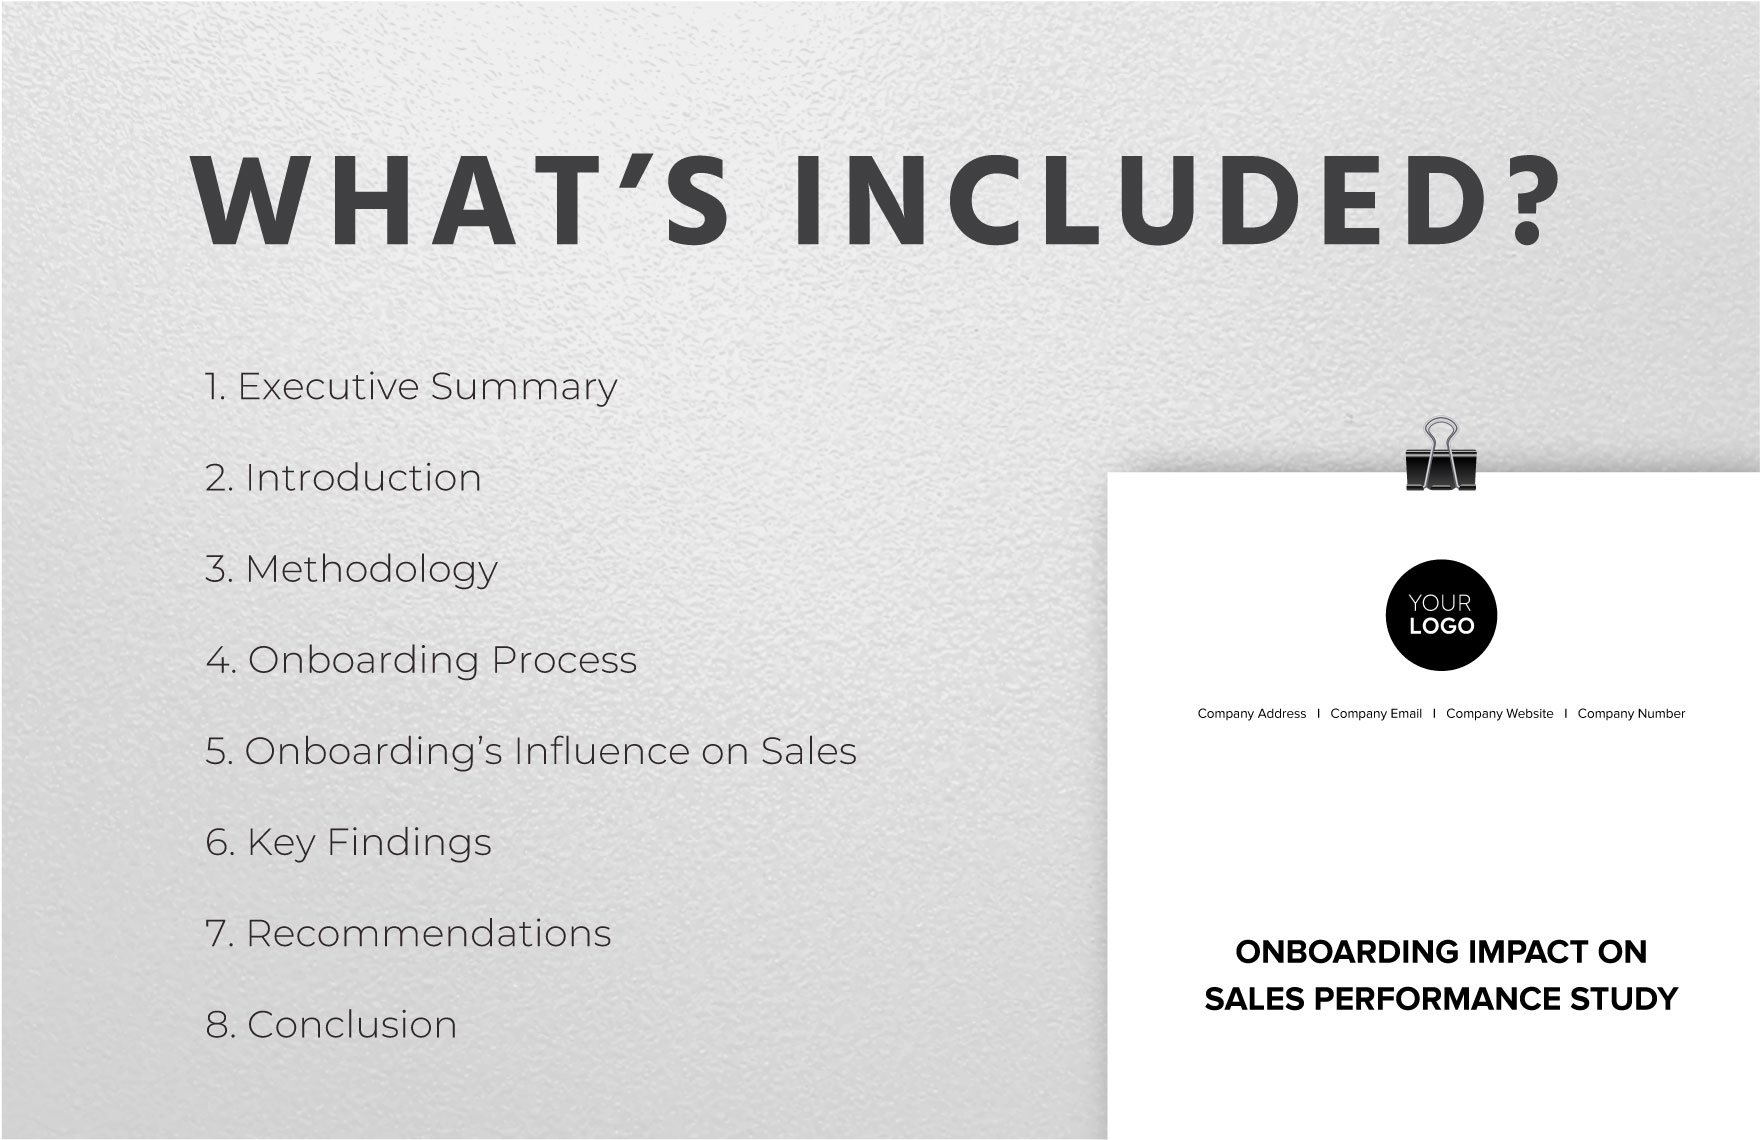 Onboarding Impact on Sales Performance Study Template